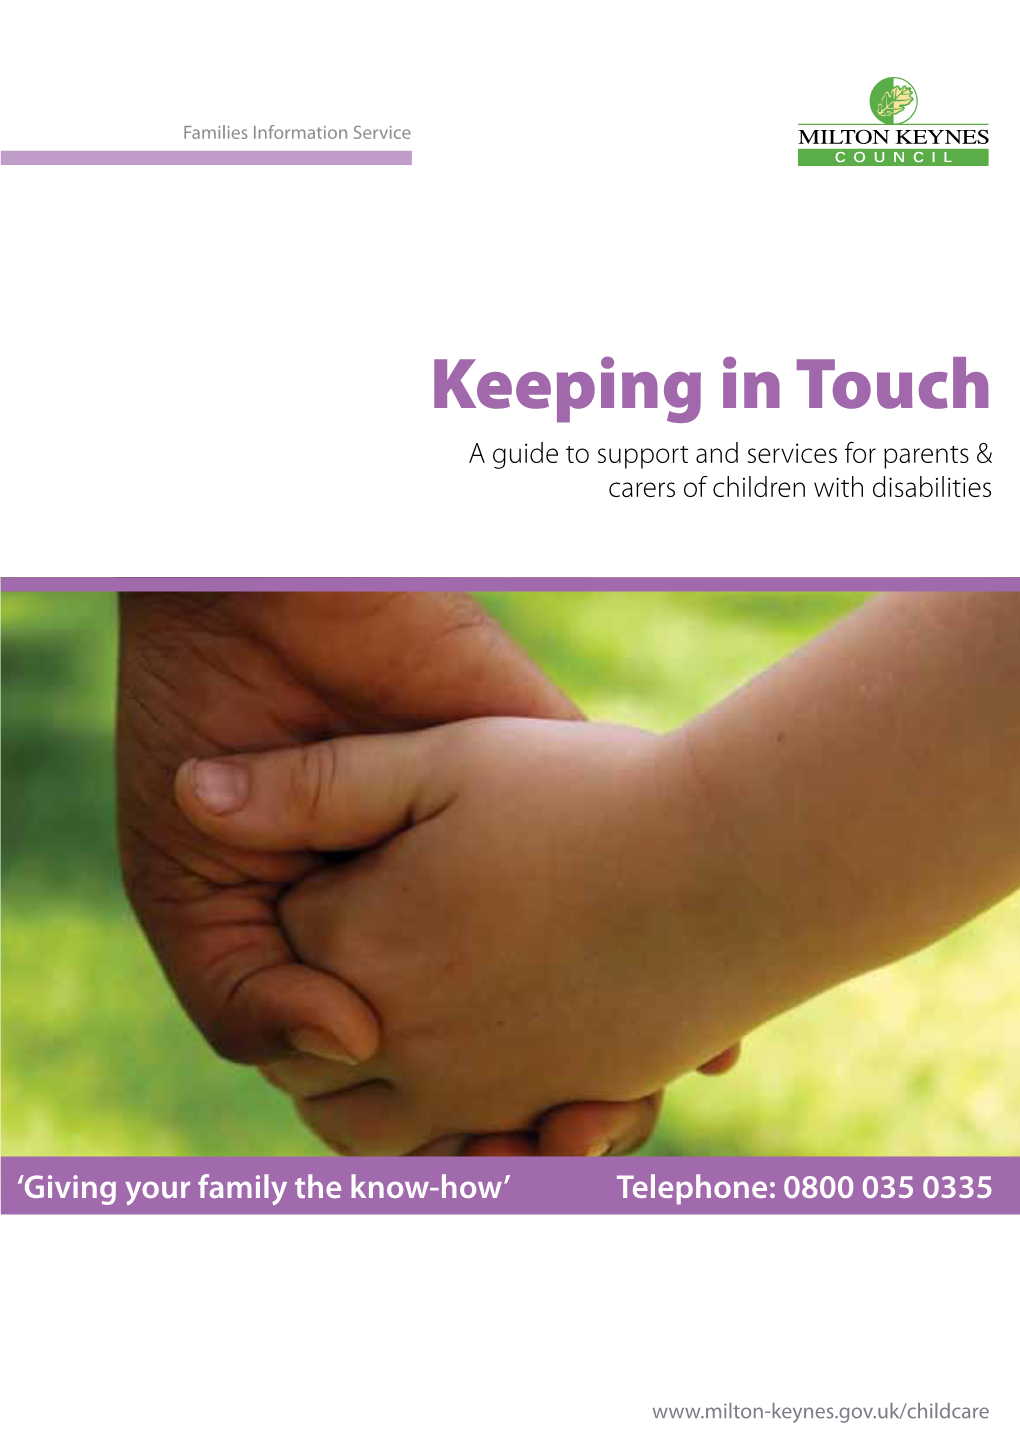 Keeping in Touch a Guide to Support and Services for Parents & Carers of Children with Disabilities